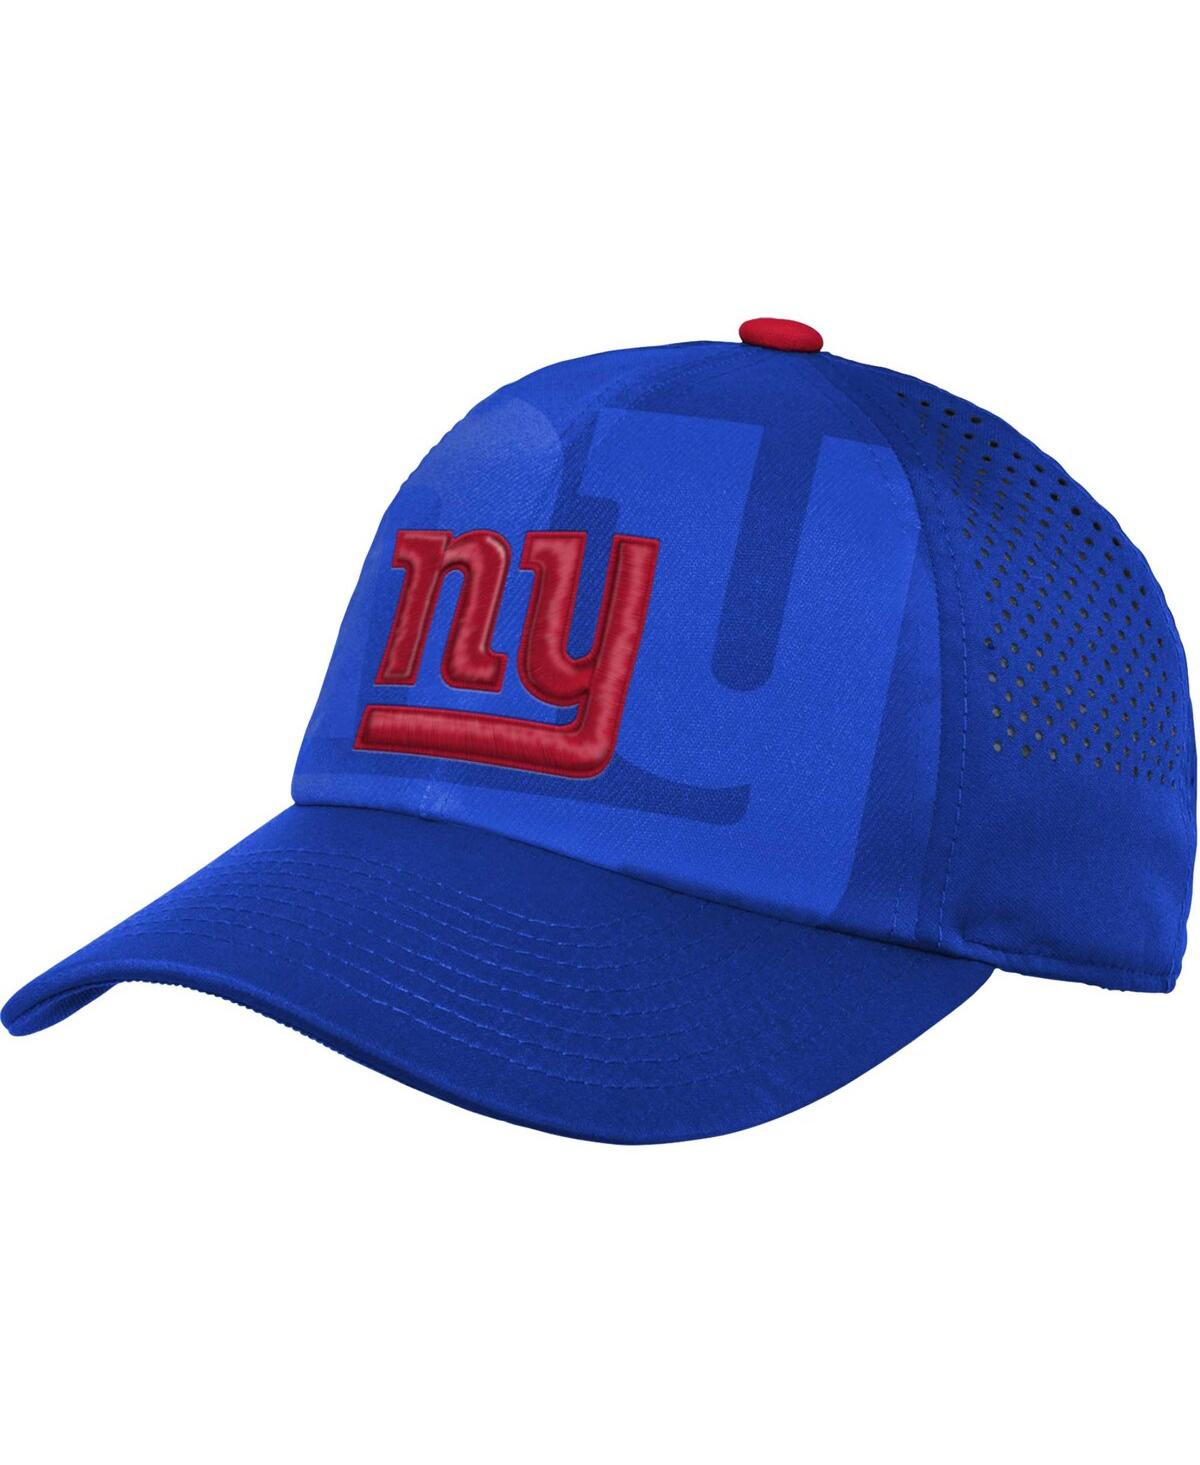 Outerstuff Kids' Big Boys And Girls Royal New York Giants Tailgate Adjustable Hat